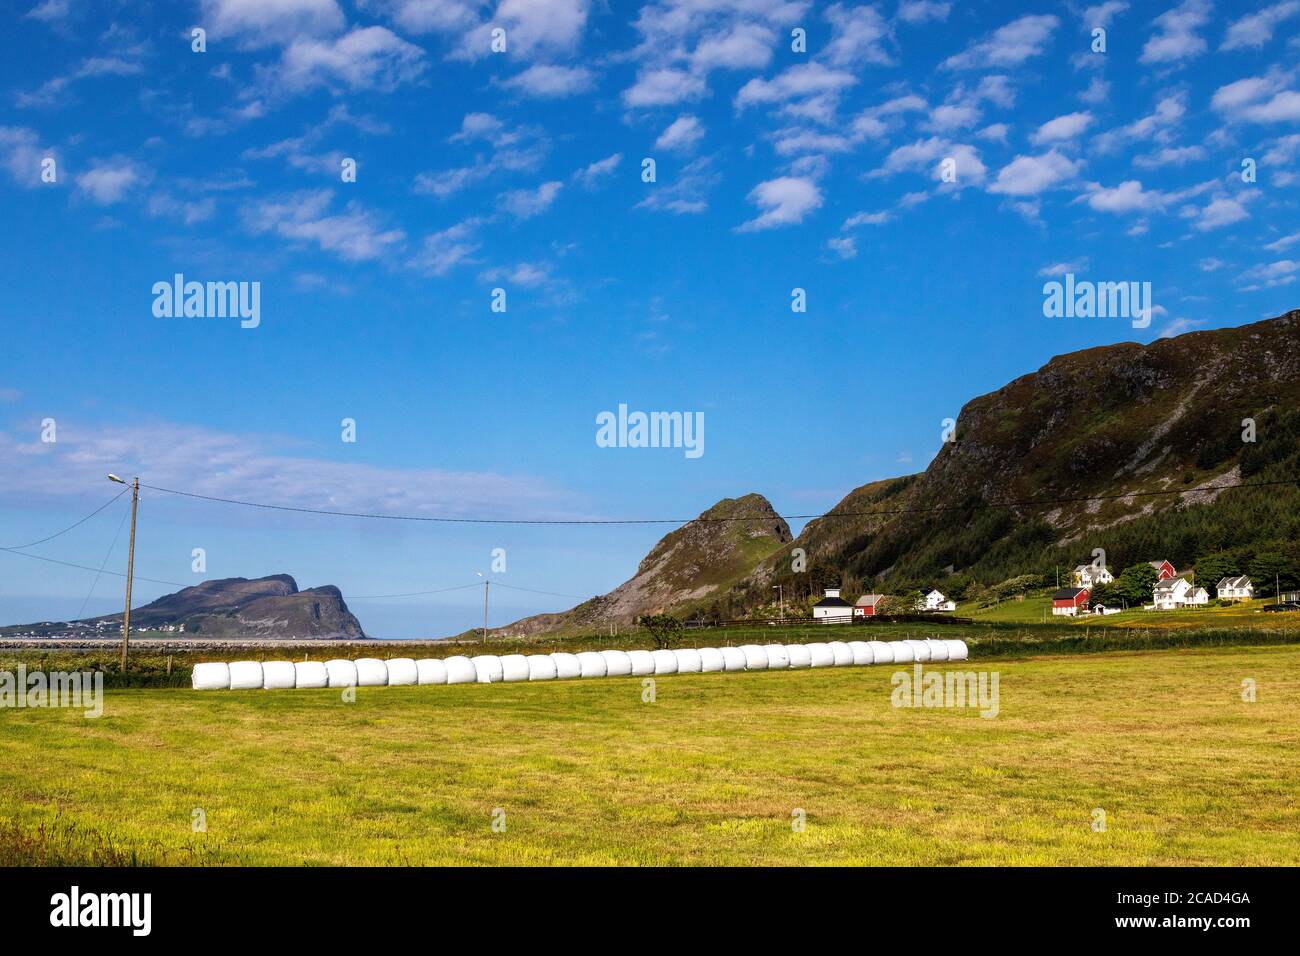 A farm at Runde island, west coast of Norway. A line of compressed animal feed balls (rundballer). Stock Photo